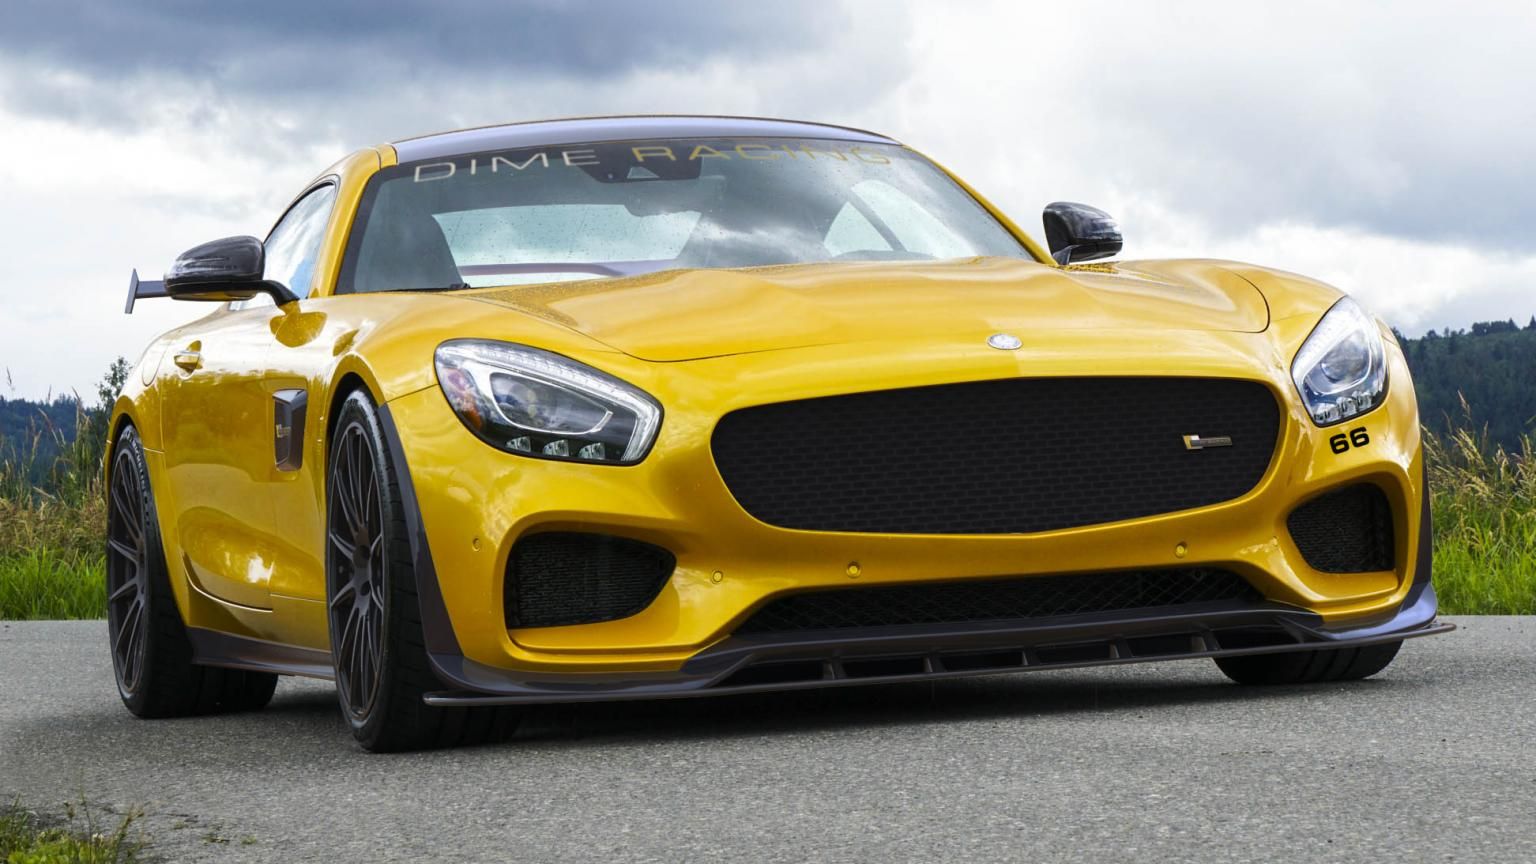 2016 Mercedes-AMG GT by Dime Racing